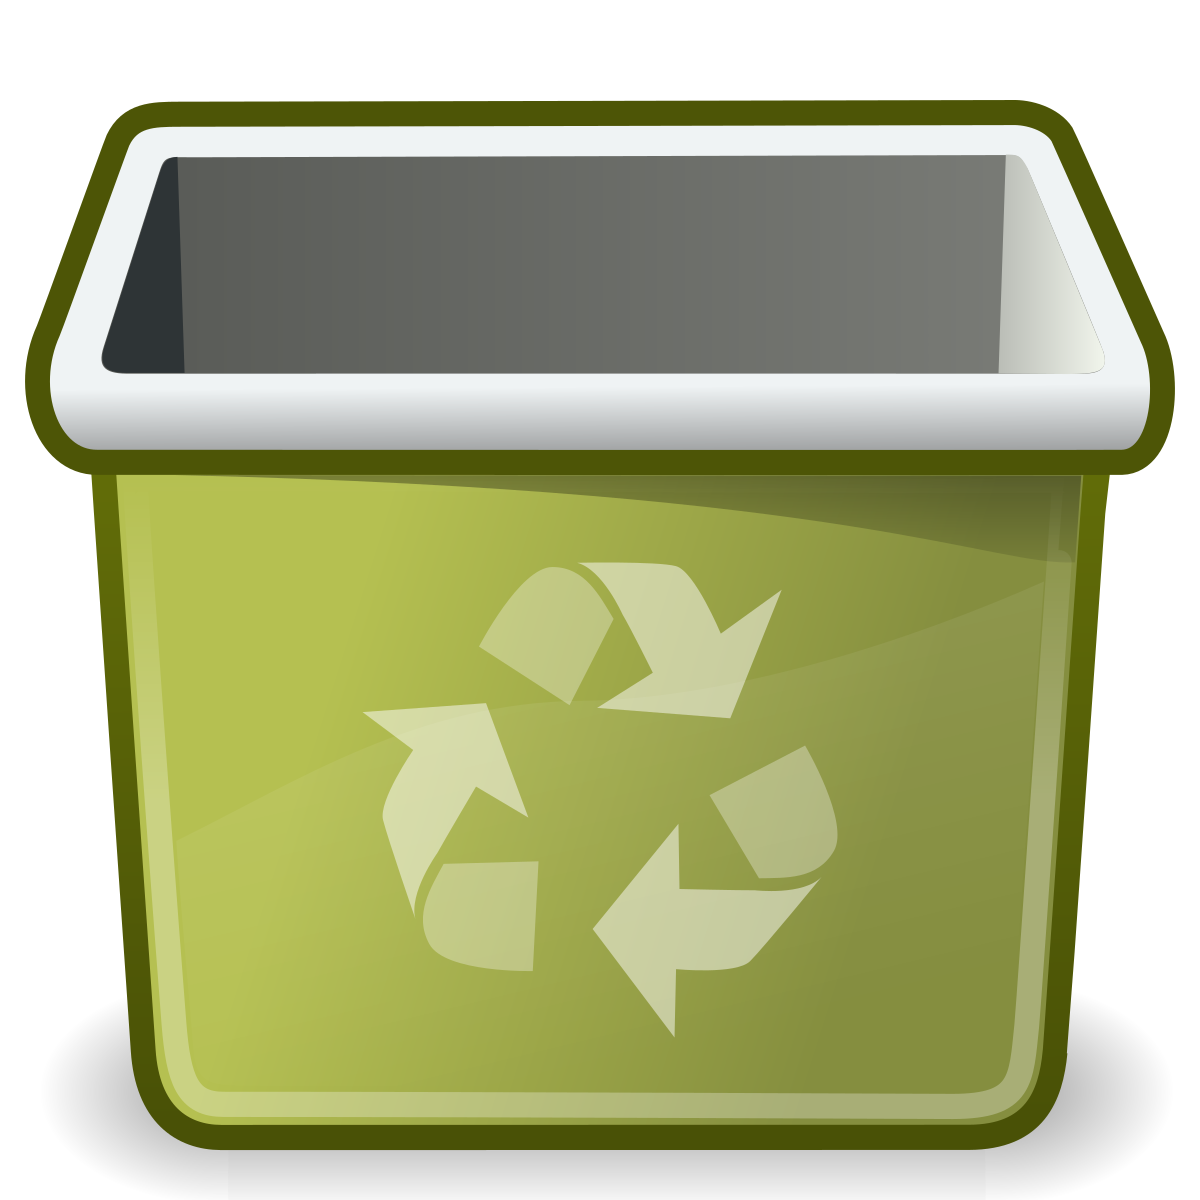 Trash can and computer icons